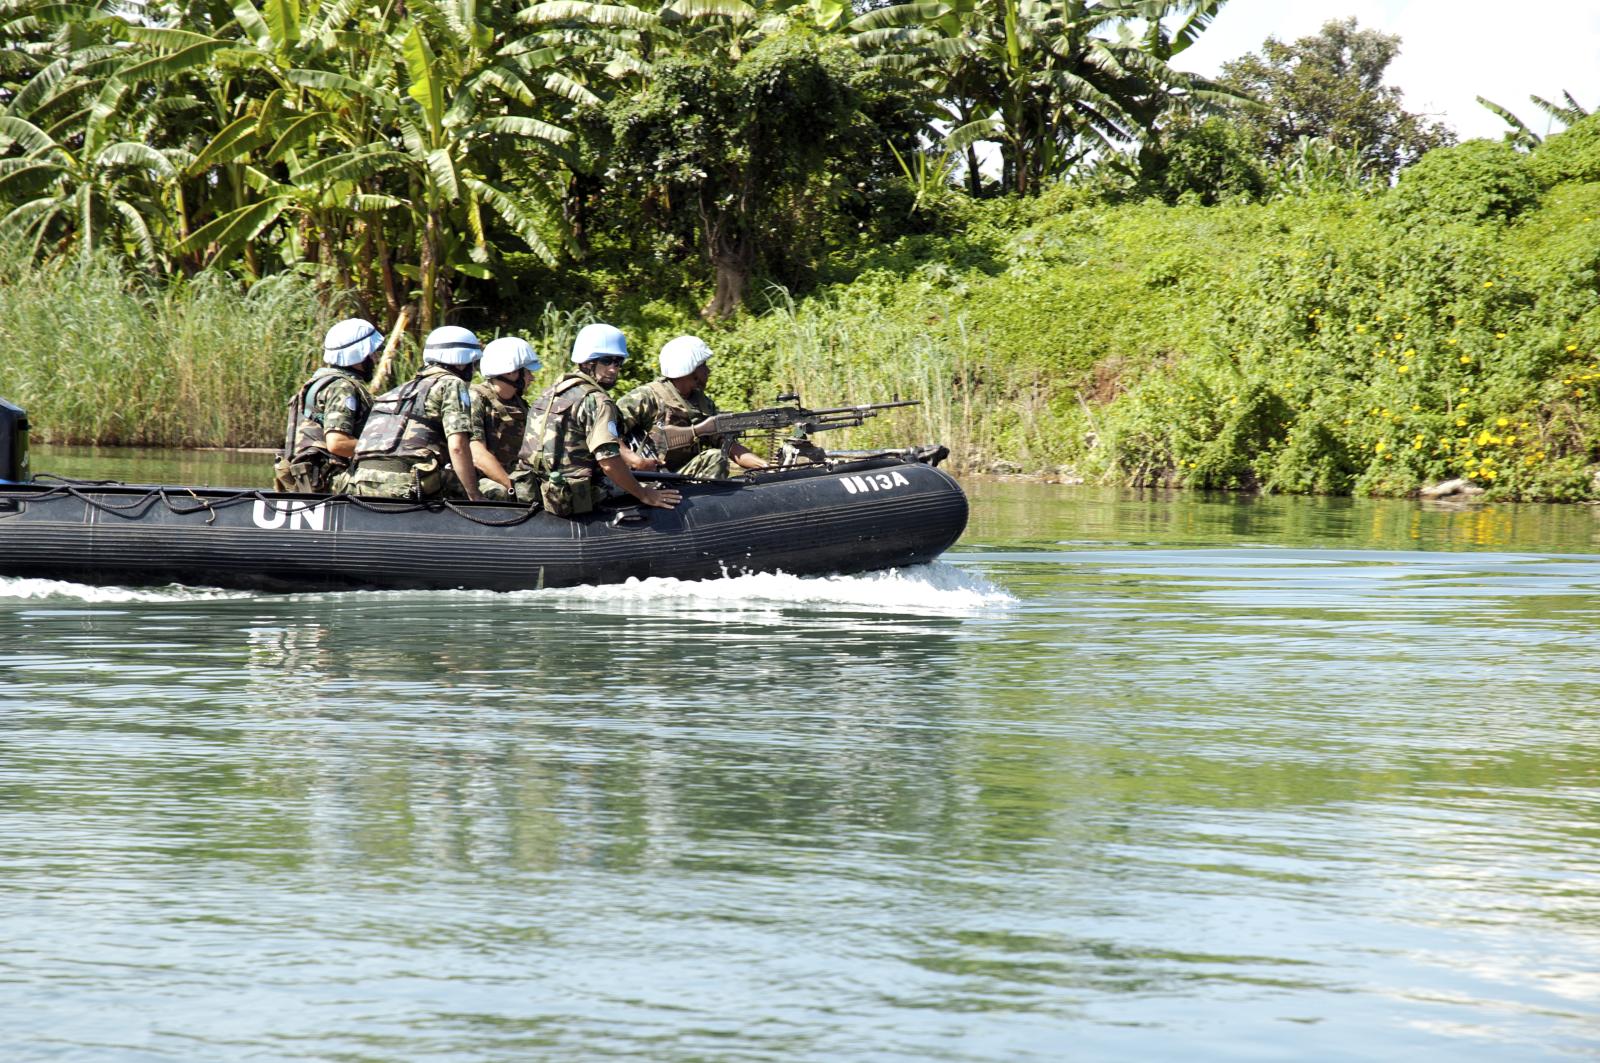 United Nations Peacekeeping in Democratic Republic of Congo